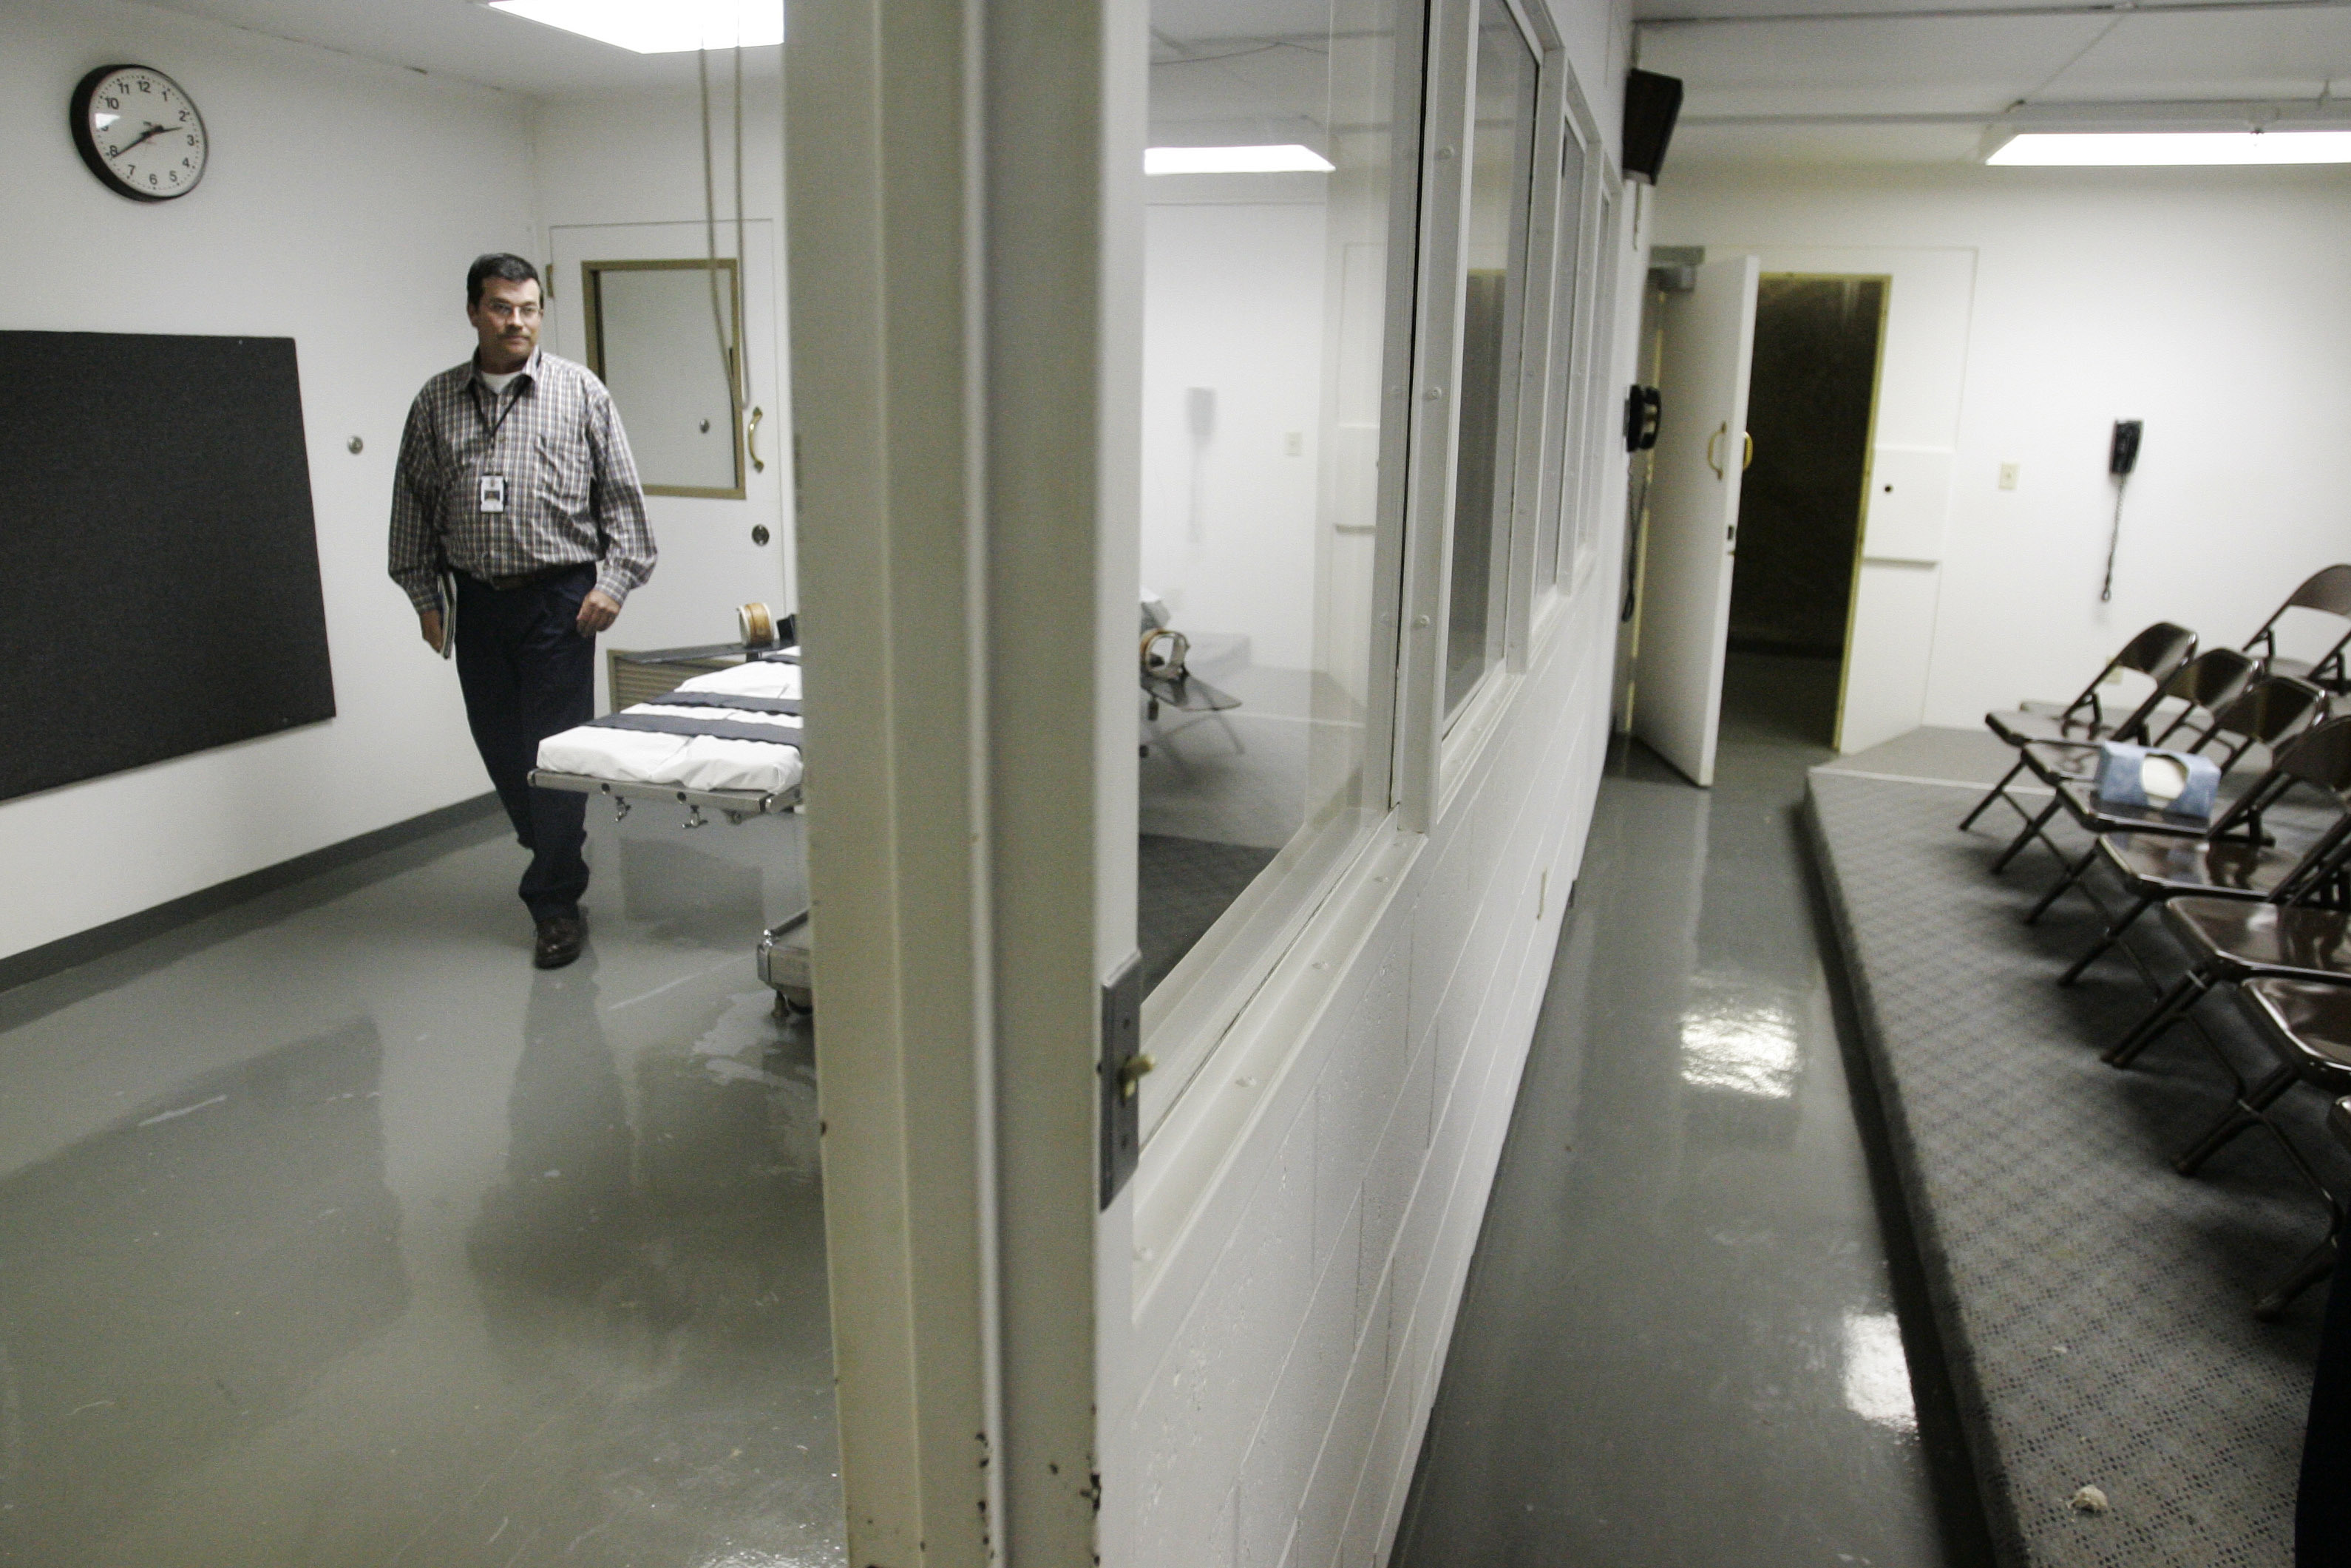 The execution chamber at the Oklahoma prison where Clayton Lockett was put to death in 2014 (AP)